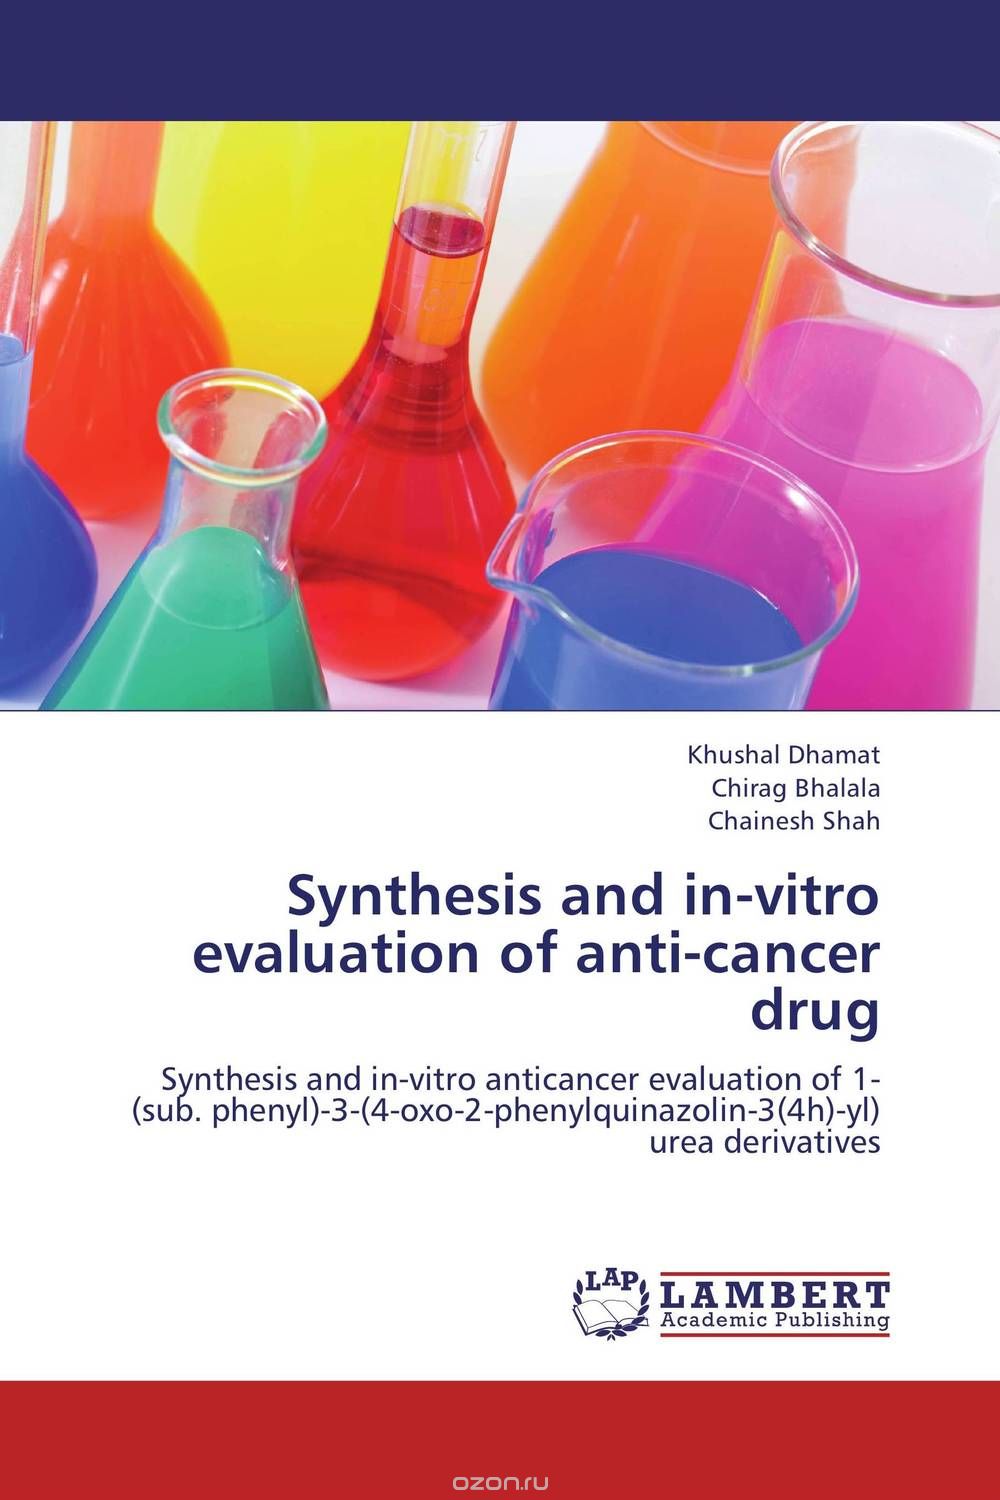 Synthesis and in-vitro evaluation of anti-cancer drug